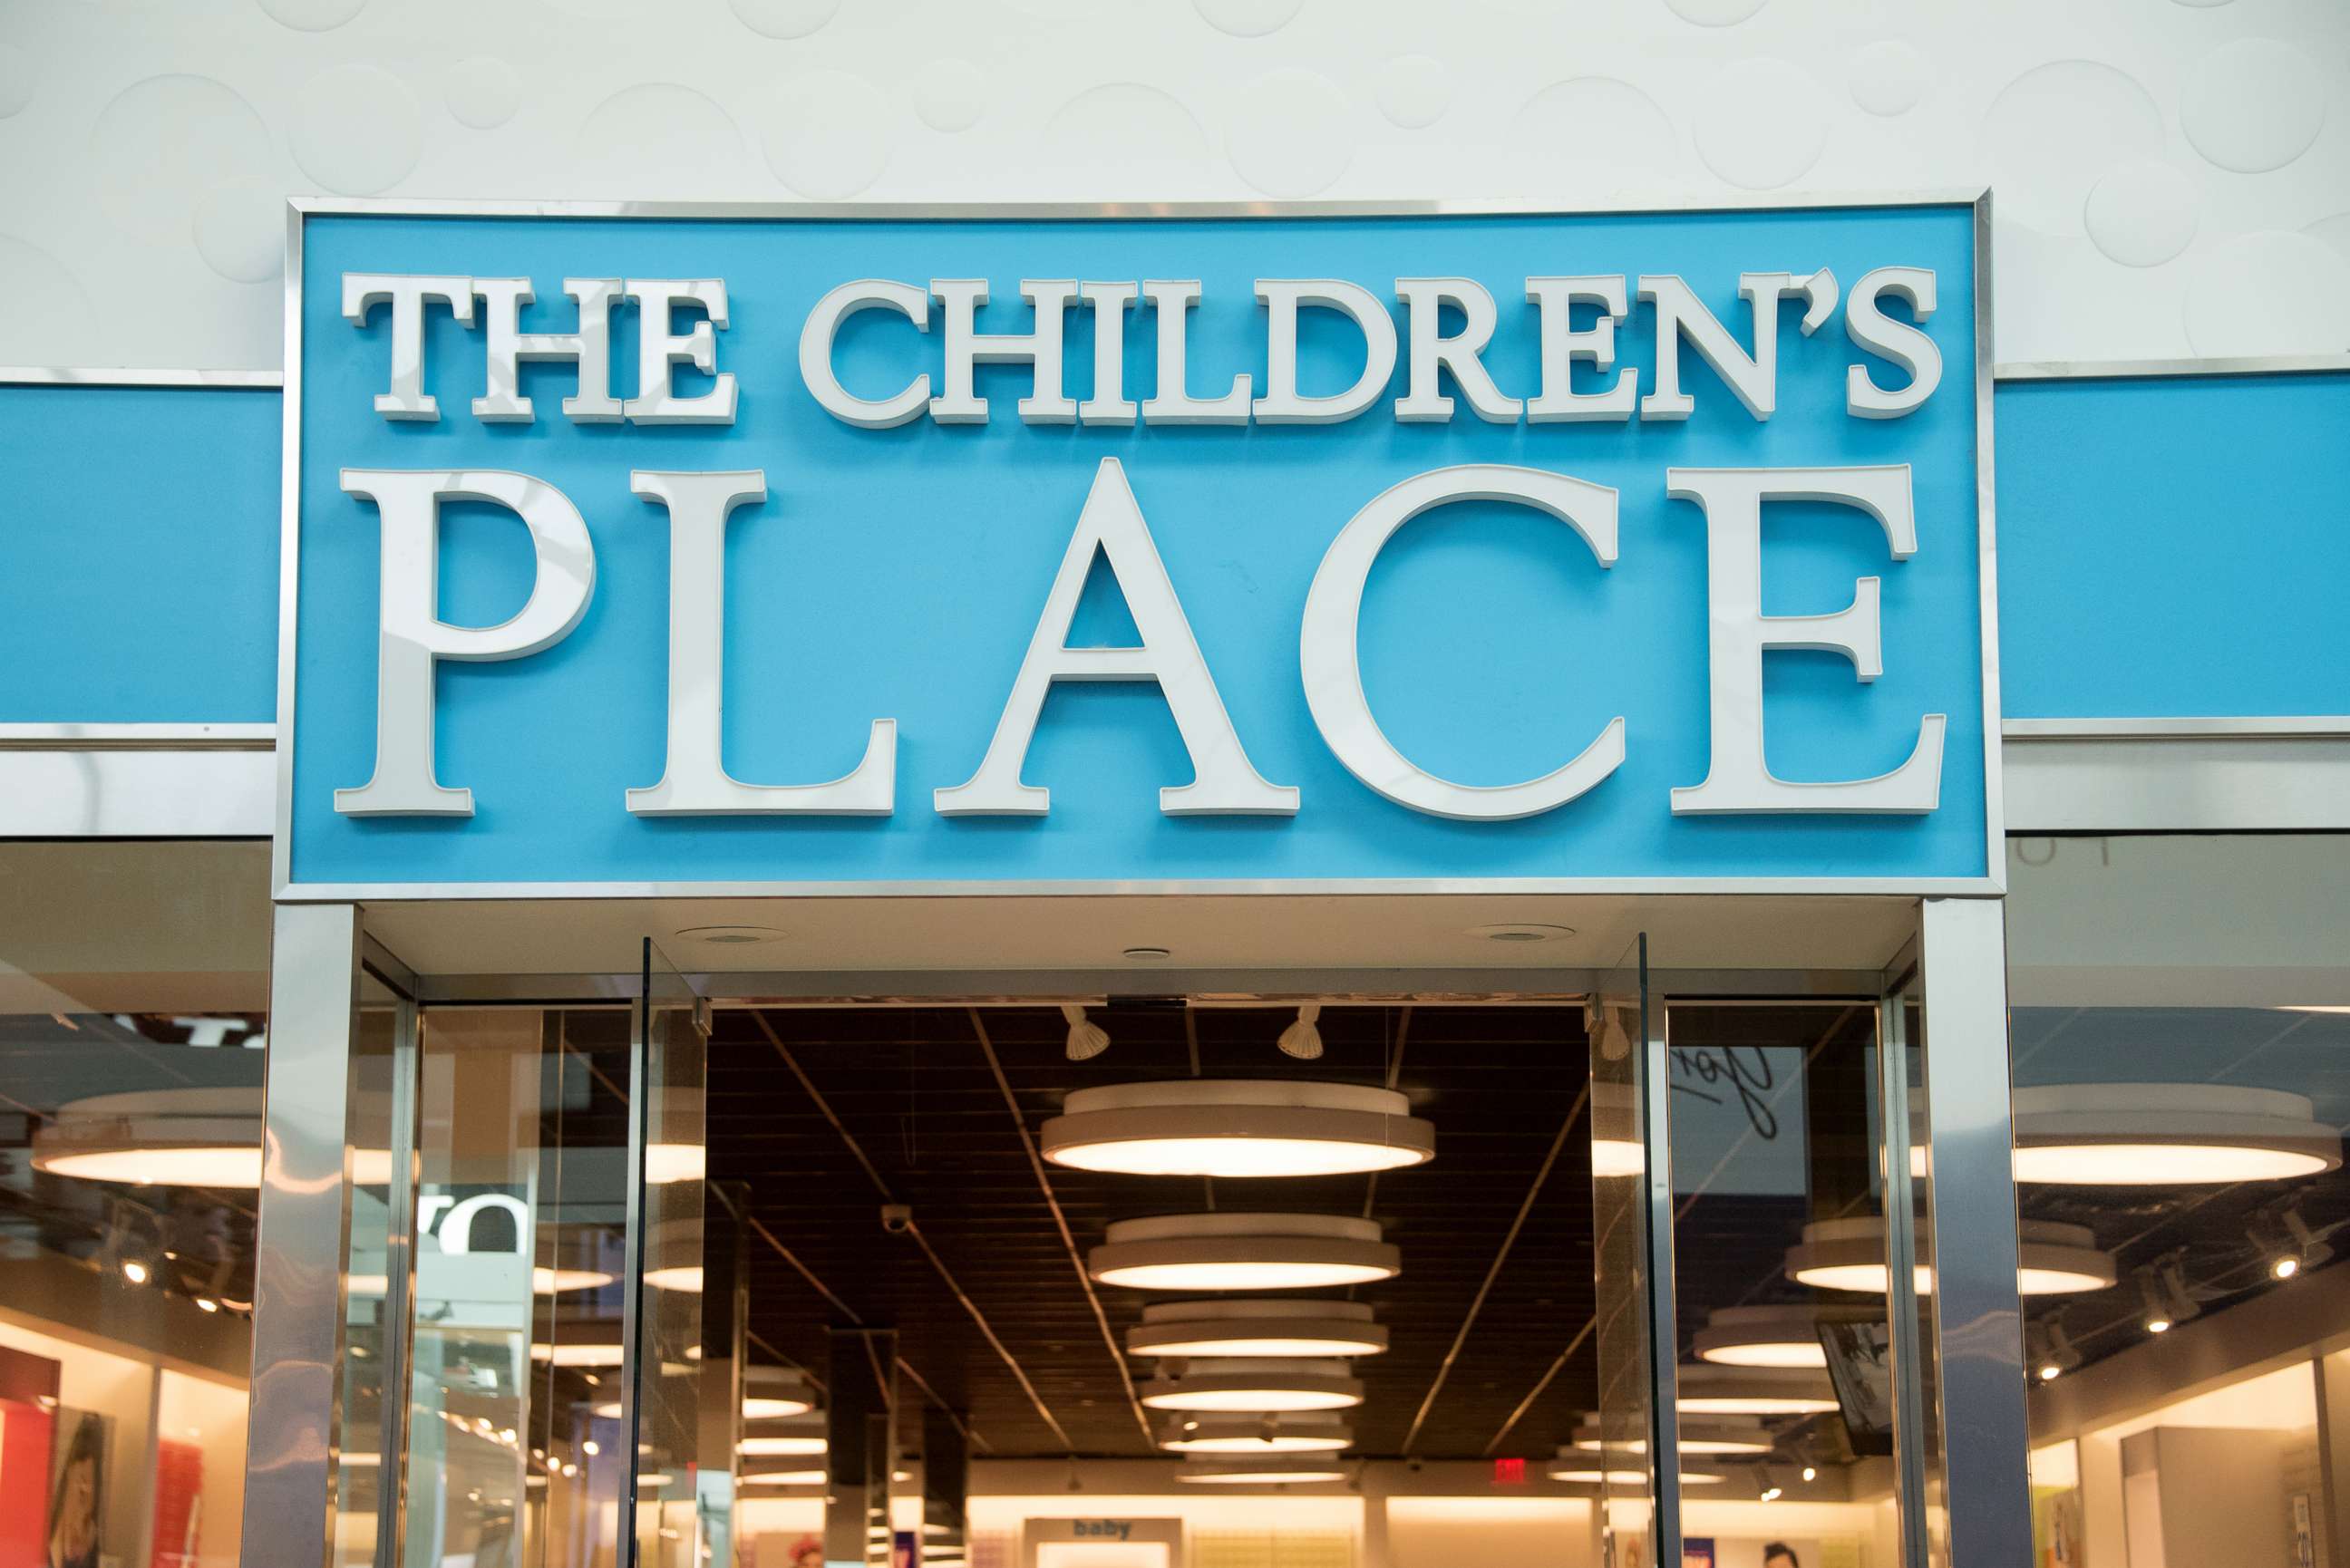 PHOTO: The Children's Place store entrance and signage.